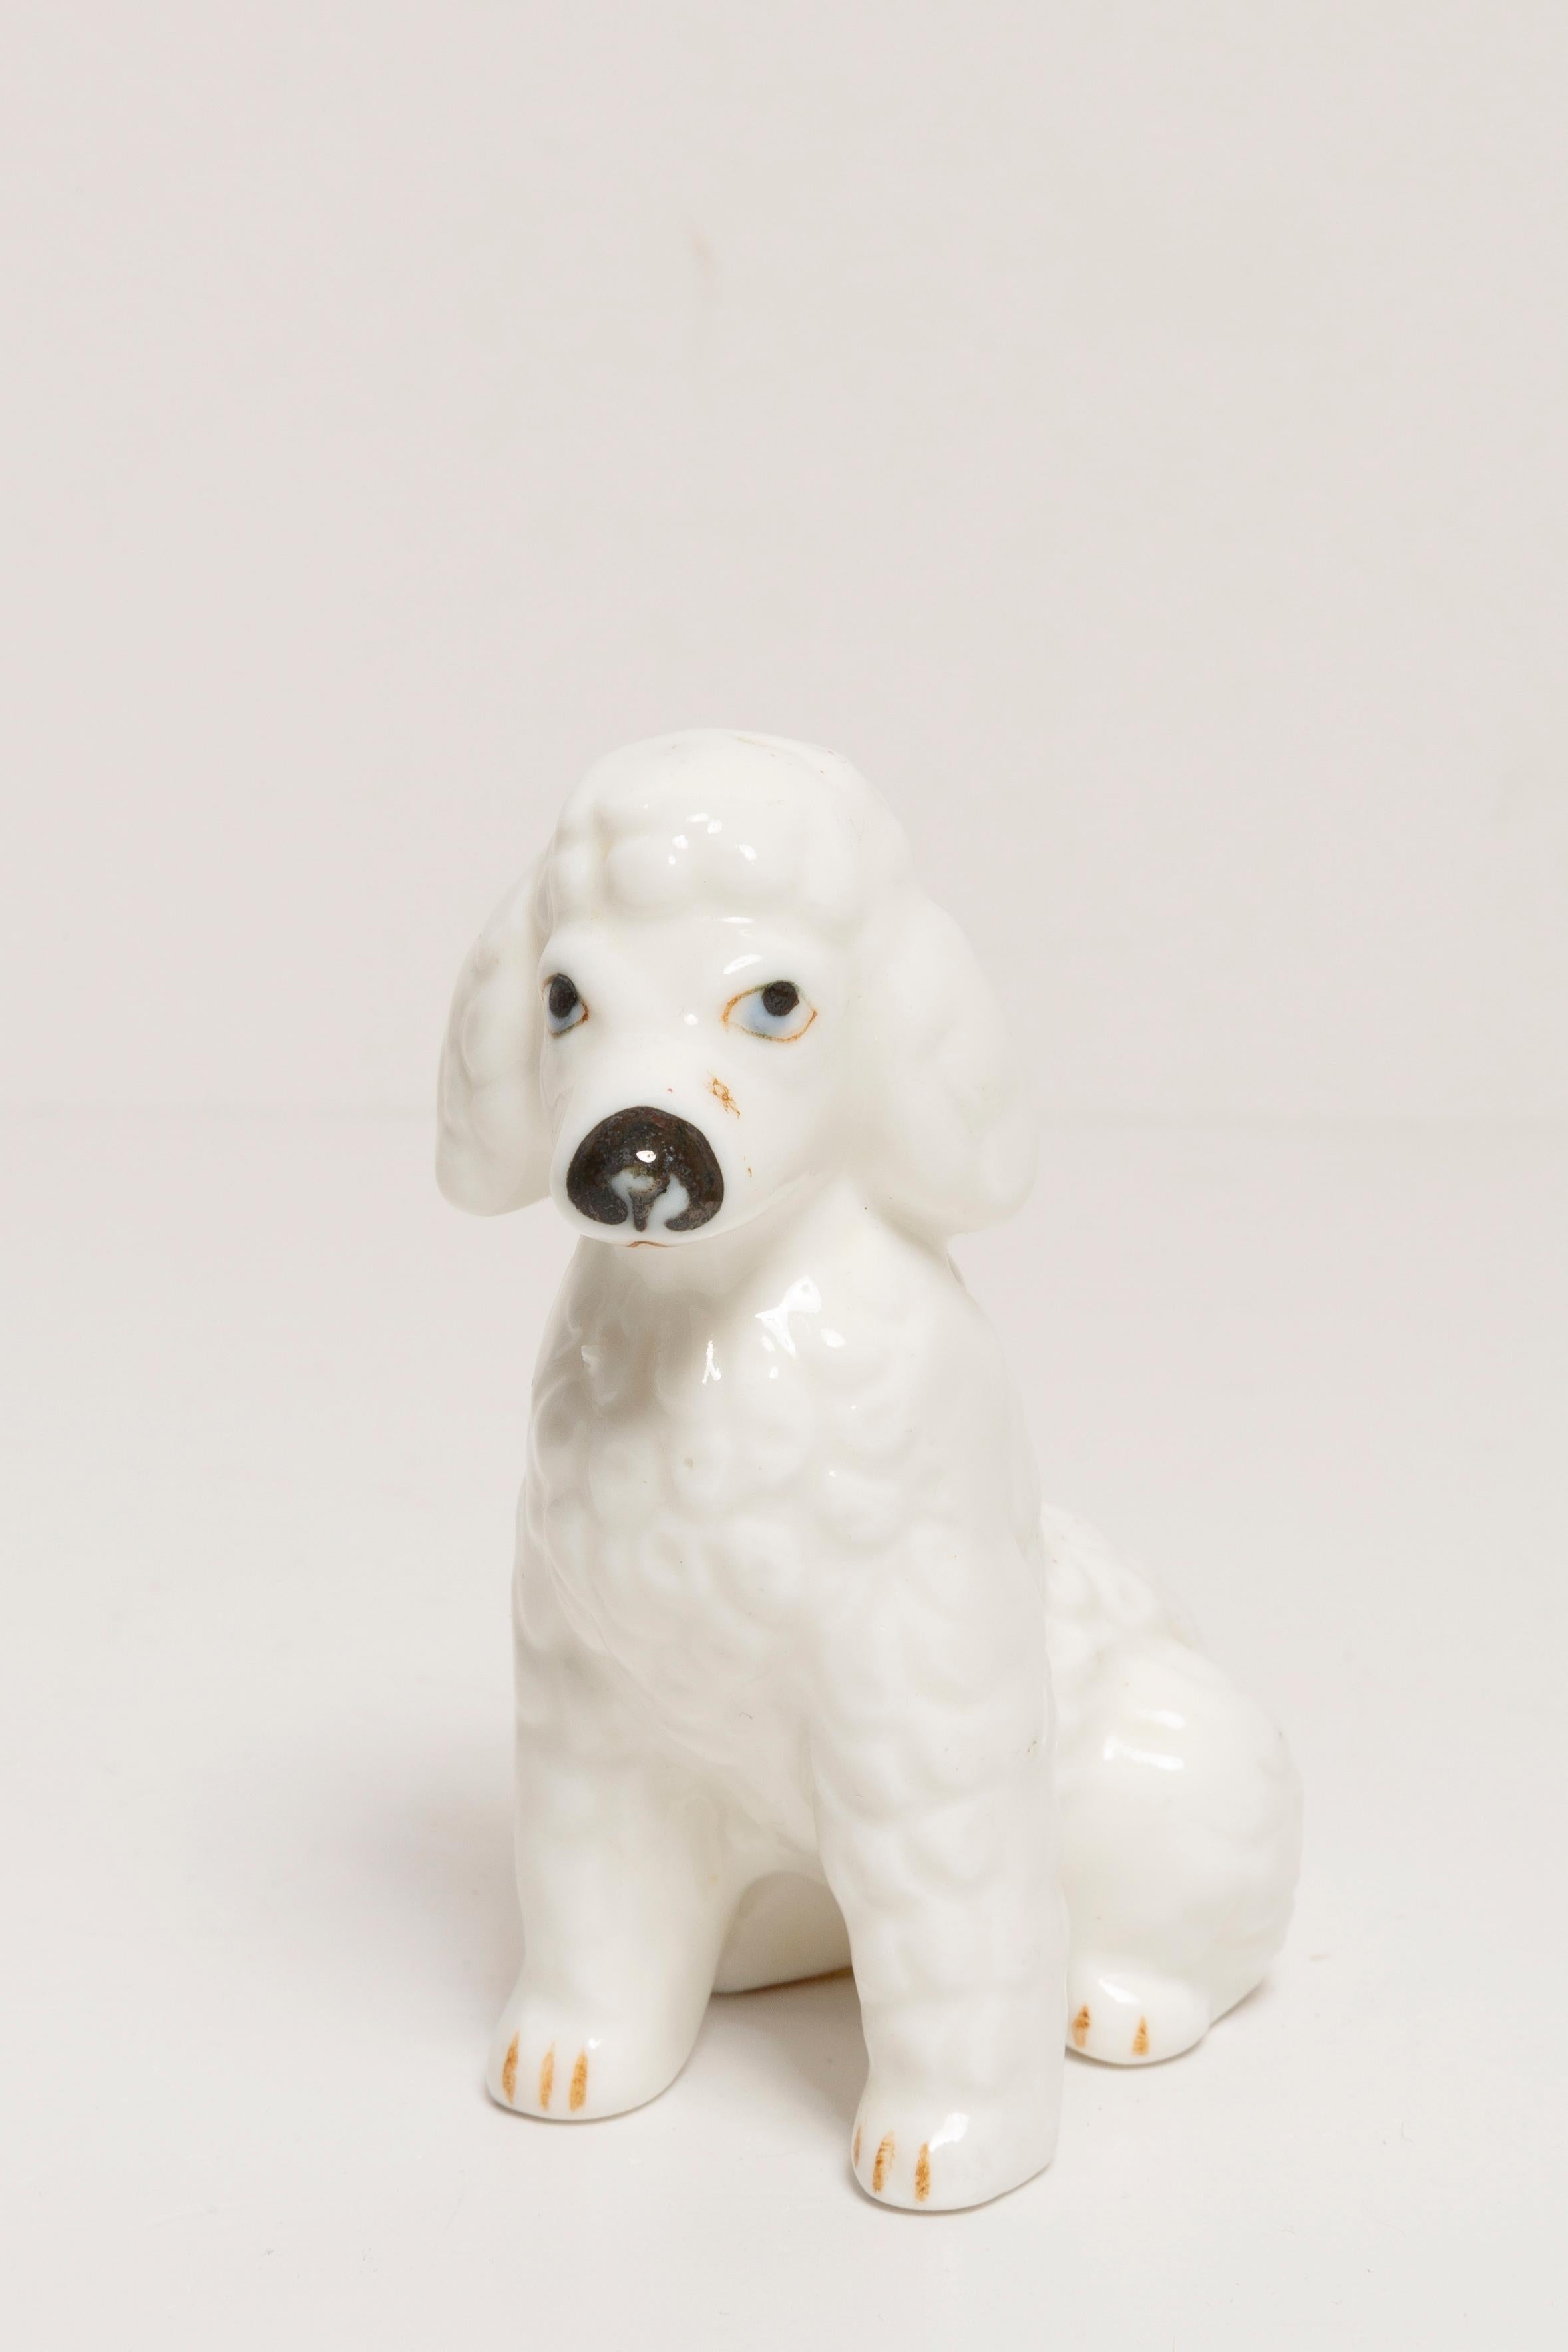 Painted ceramic, very good original vintage condition. No damages or cracks. Beautiful and unique decorative sculpture. Mini White Poodle Dog Sculpture was produced in Italy. Only one dog available.